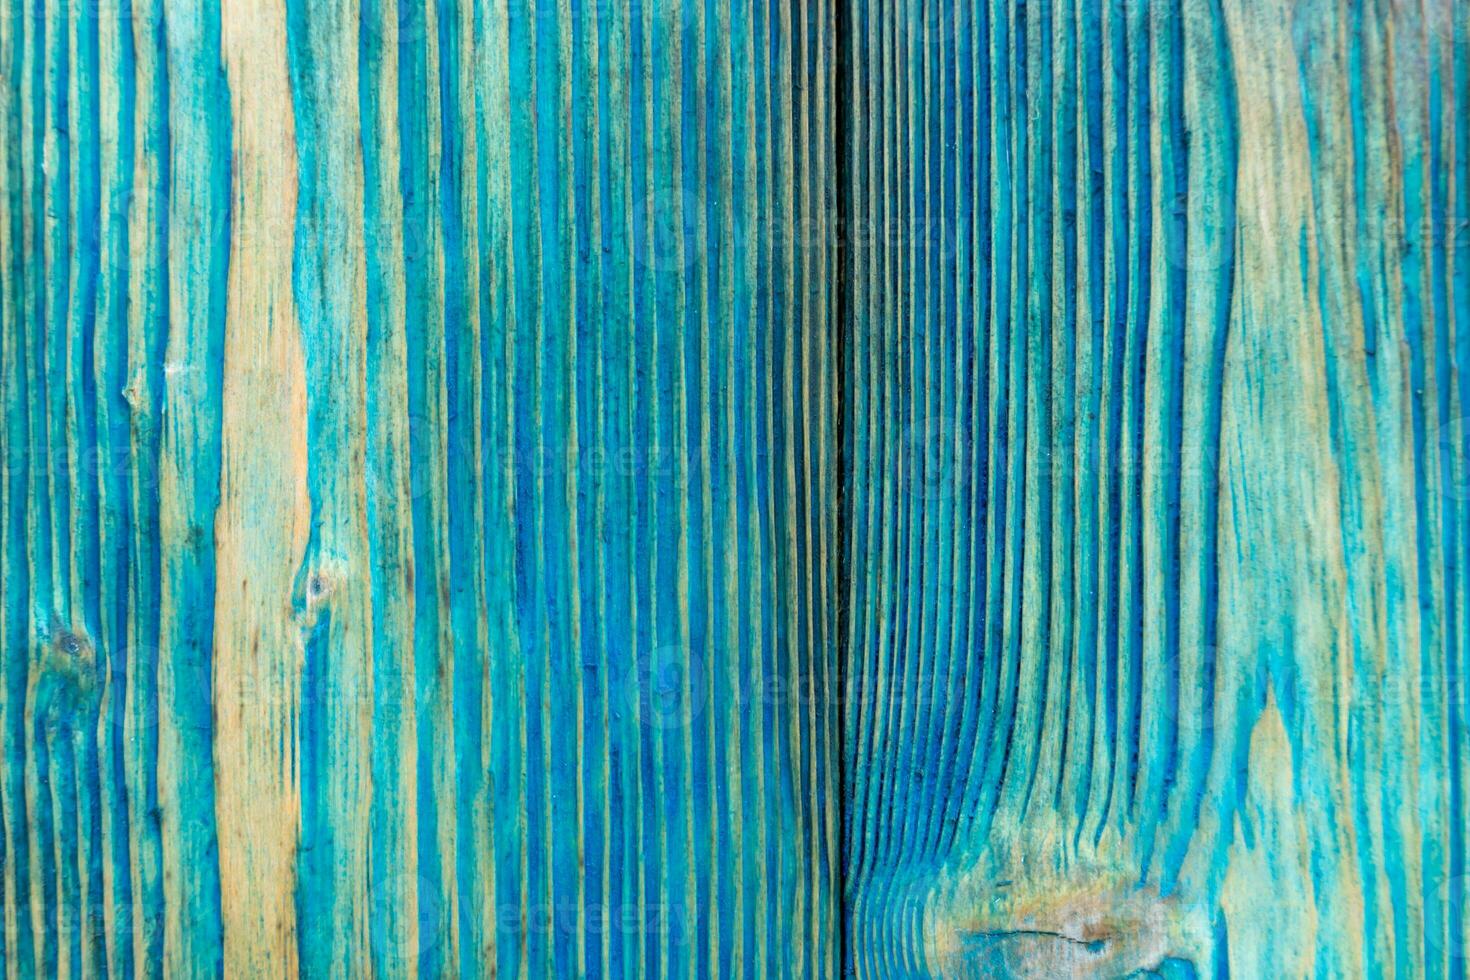 Rustic Turquoise Textured Wooden Planks Background for Home Decor and Design Projects photo